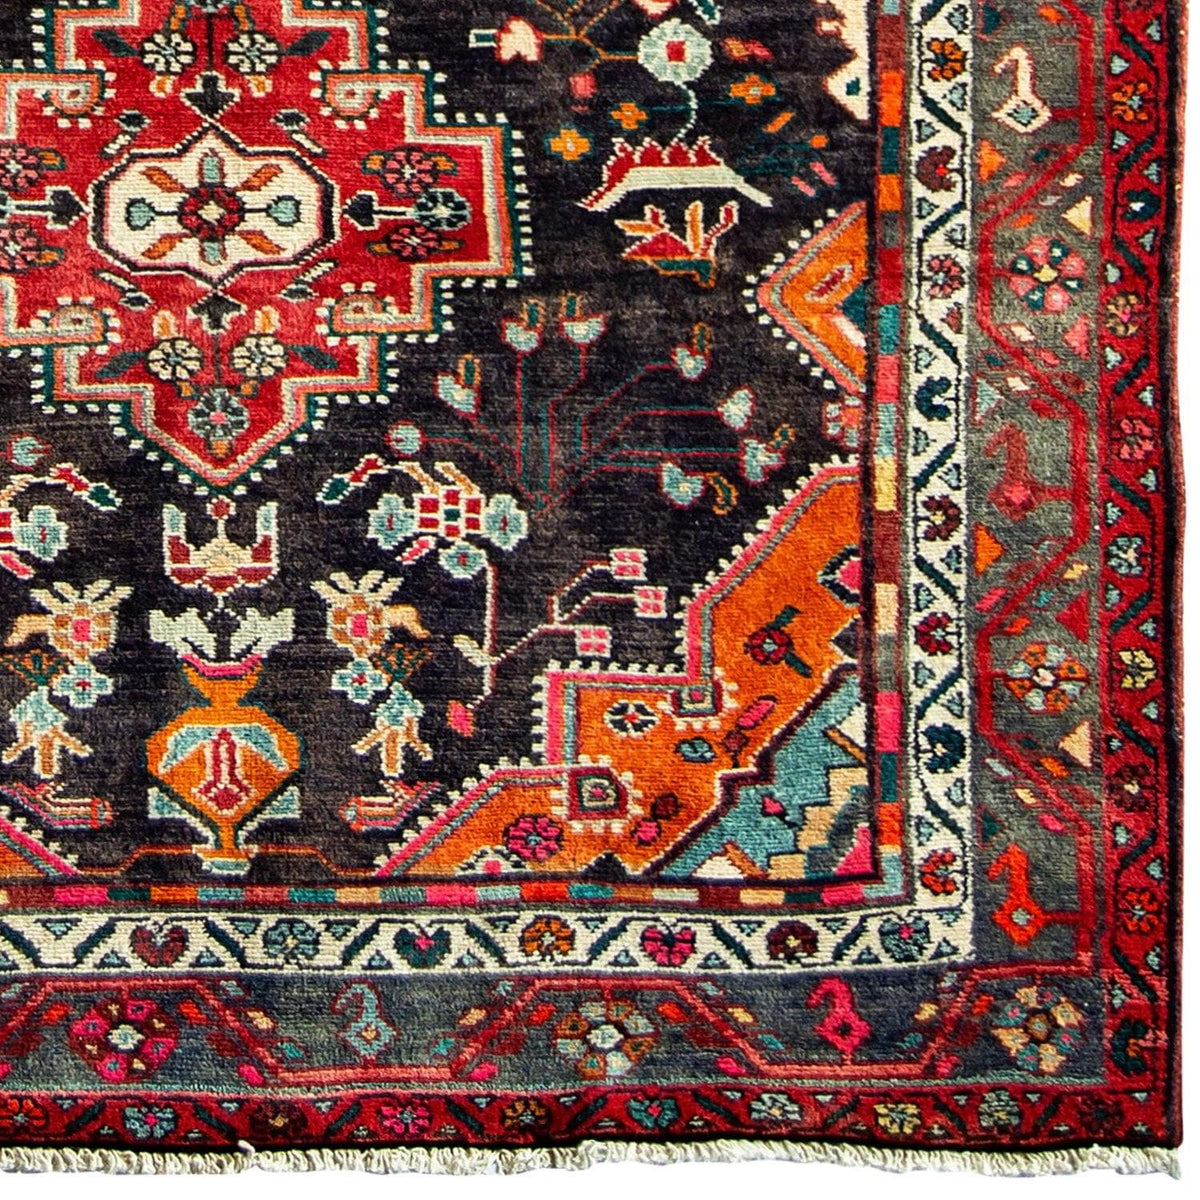 Fine Hand-knotted Wool Vintage Persian Runner 140cm x 308cm